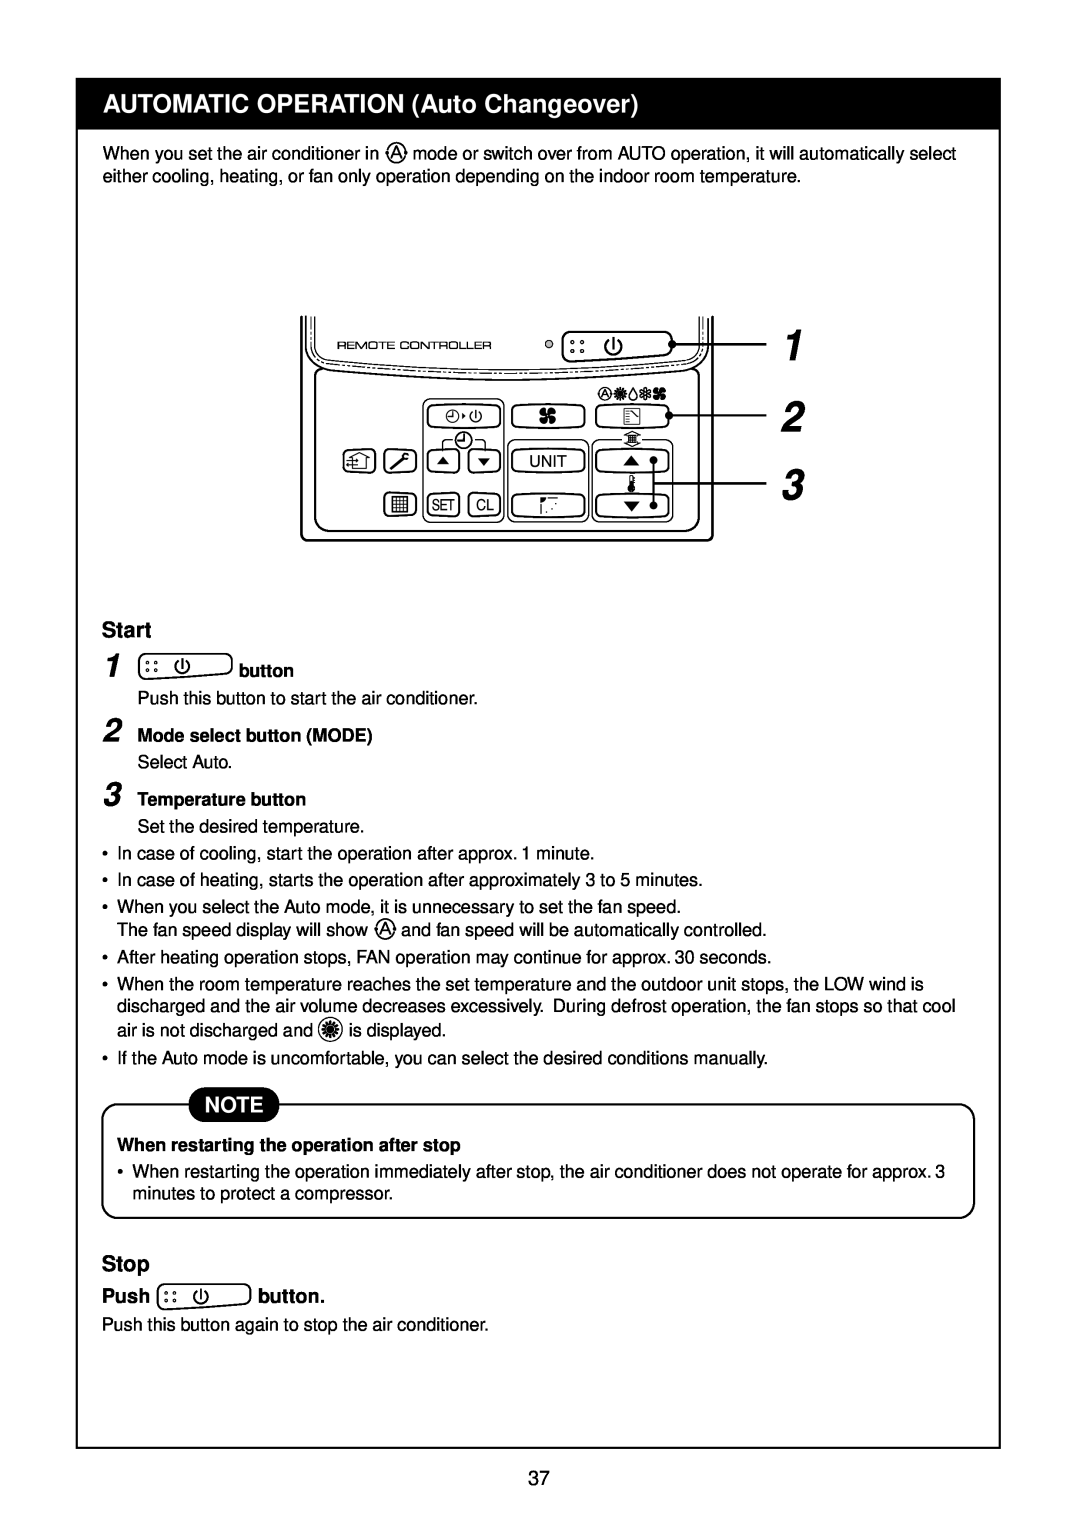 Toshiba R410A service manual 1 2 3, AUTOMATIC OPERATION Auto Changeover, Start, Stop, Push button 